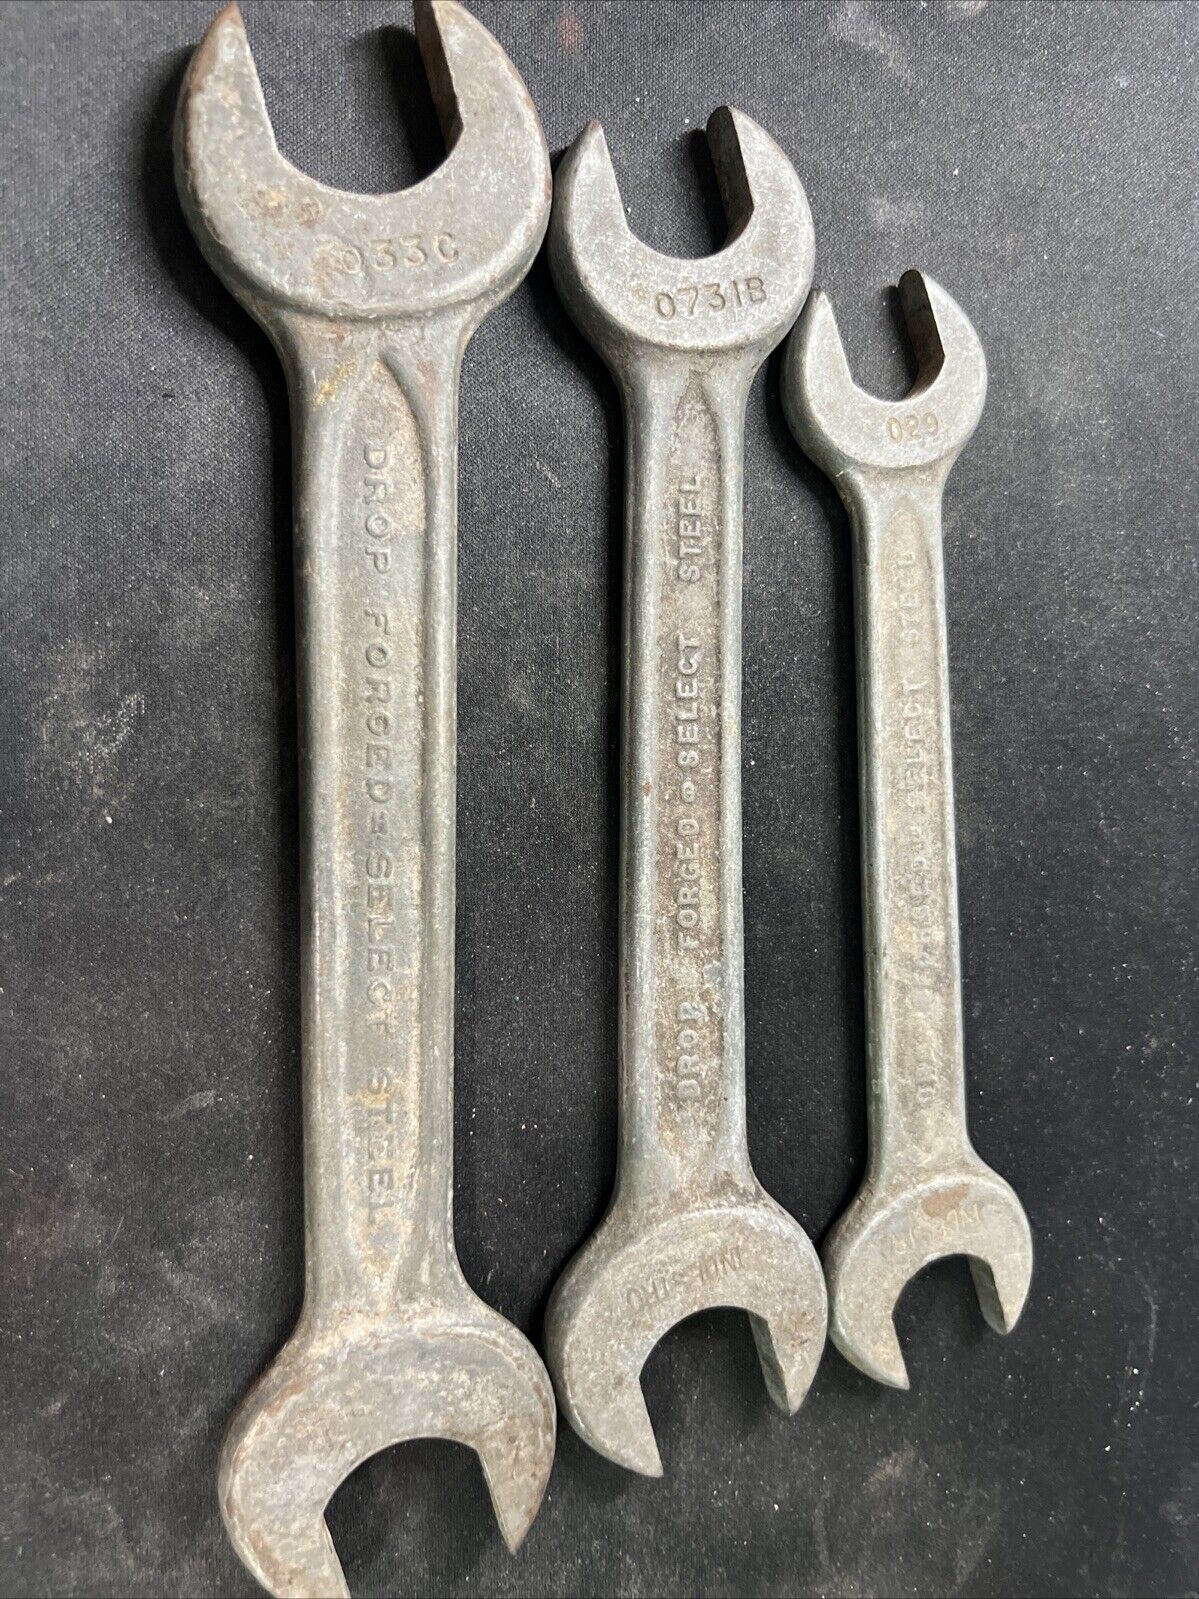 Vintage Indestro Metric Double Open-End Wrench Set - Made In The USA - 3 Piece